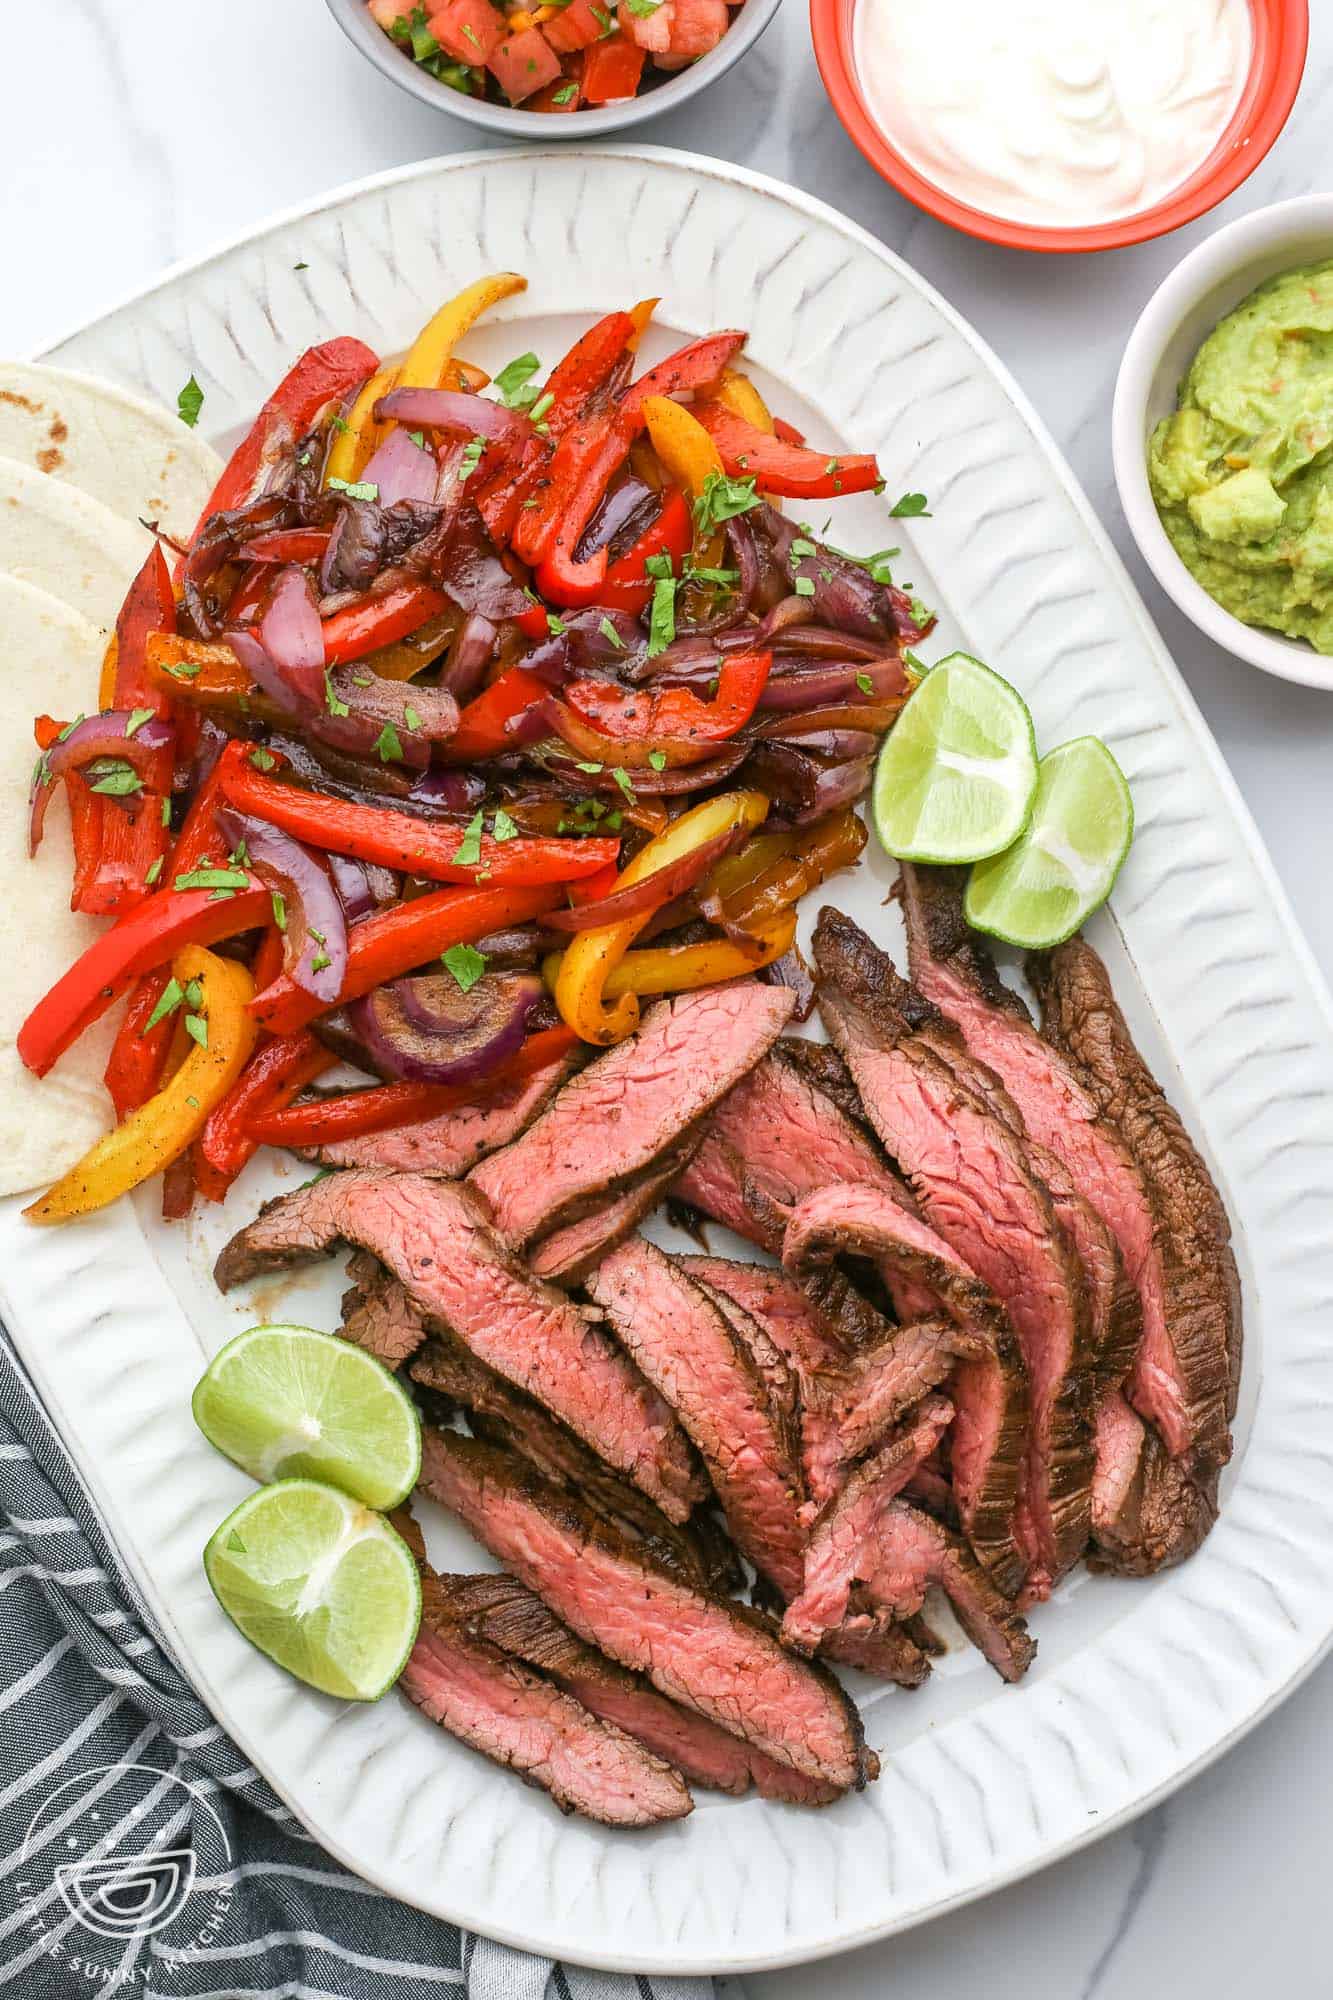 a large white platter of fajita veggies, sliced steak fajitas, and lime wedges. On the side are flour tortillas, sour cream, guacamole, and pico.